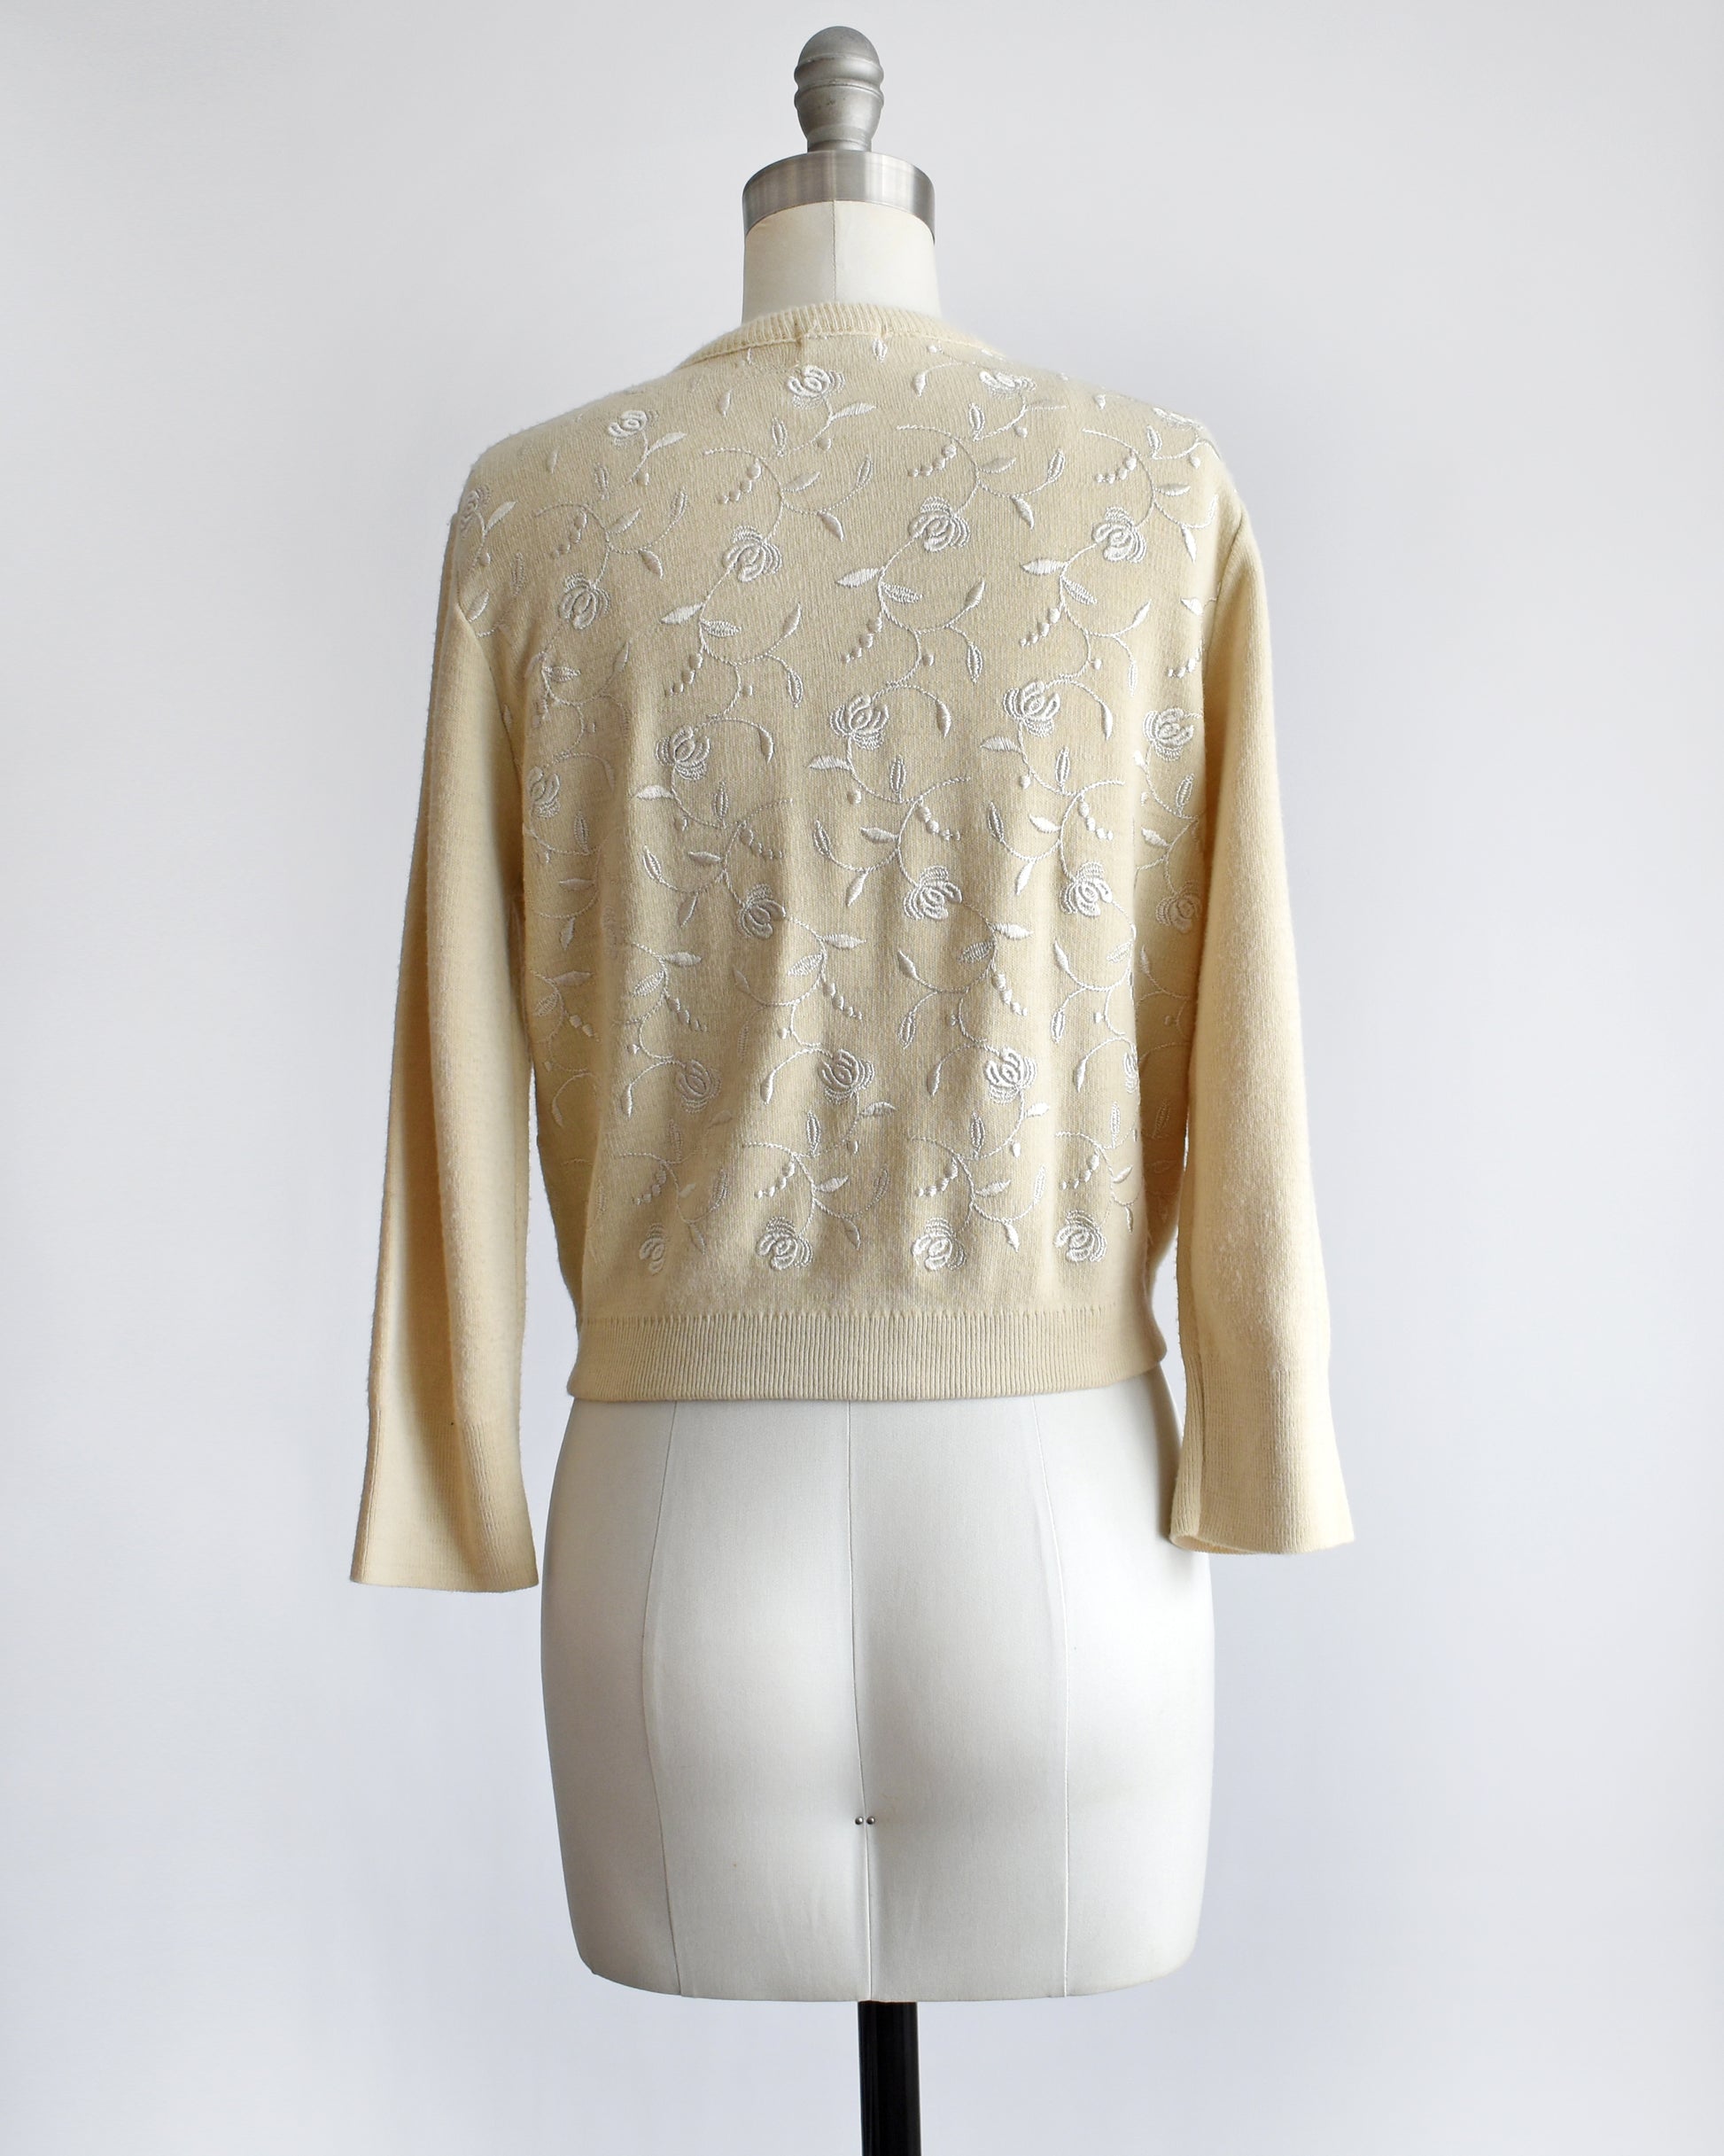 back view of a vintage 1960s embroidered floral cardigan